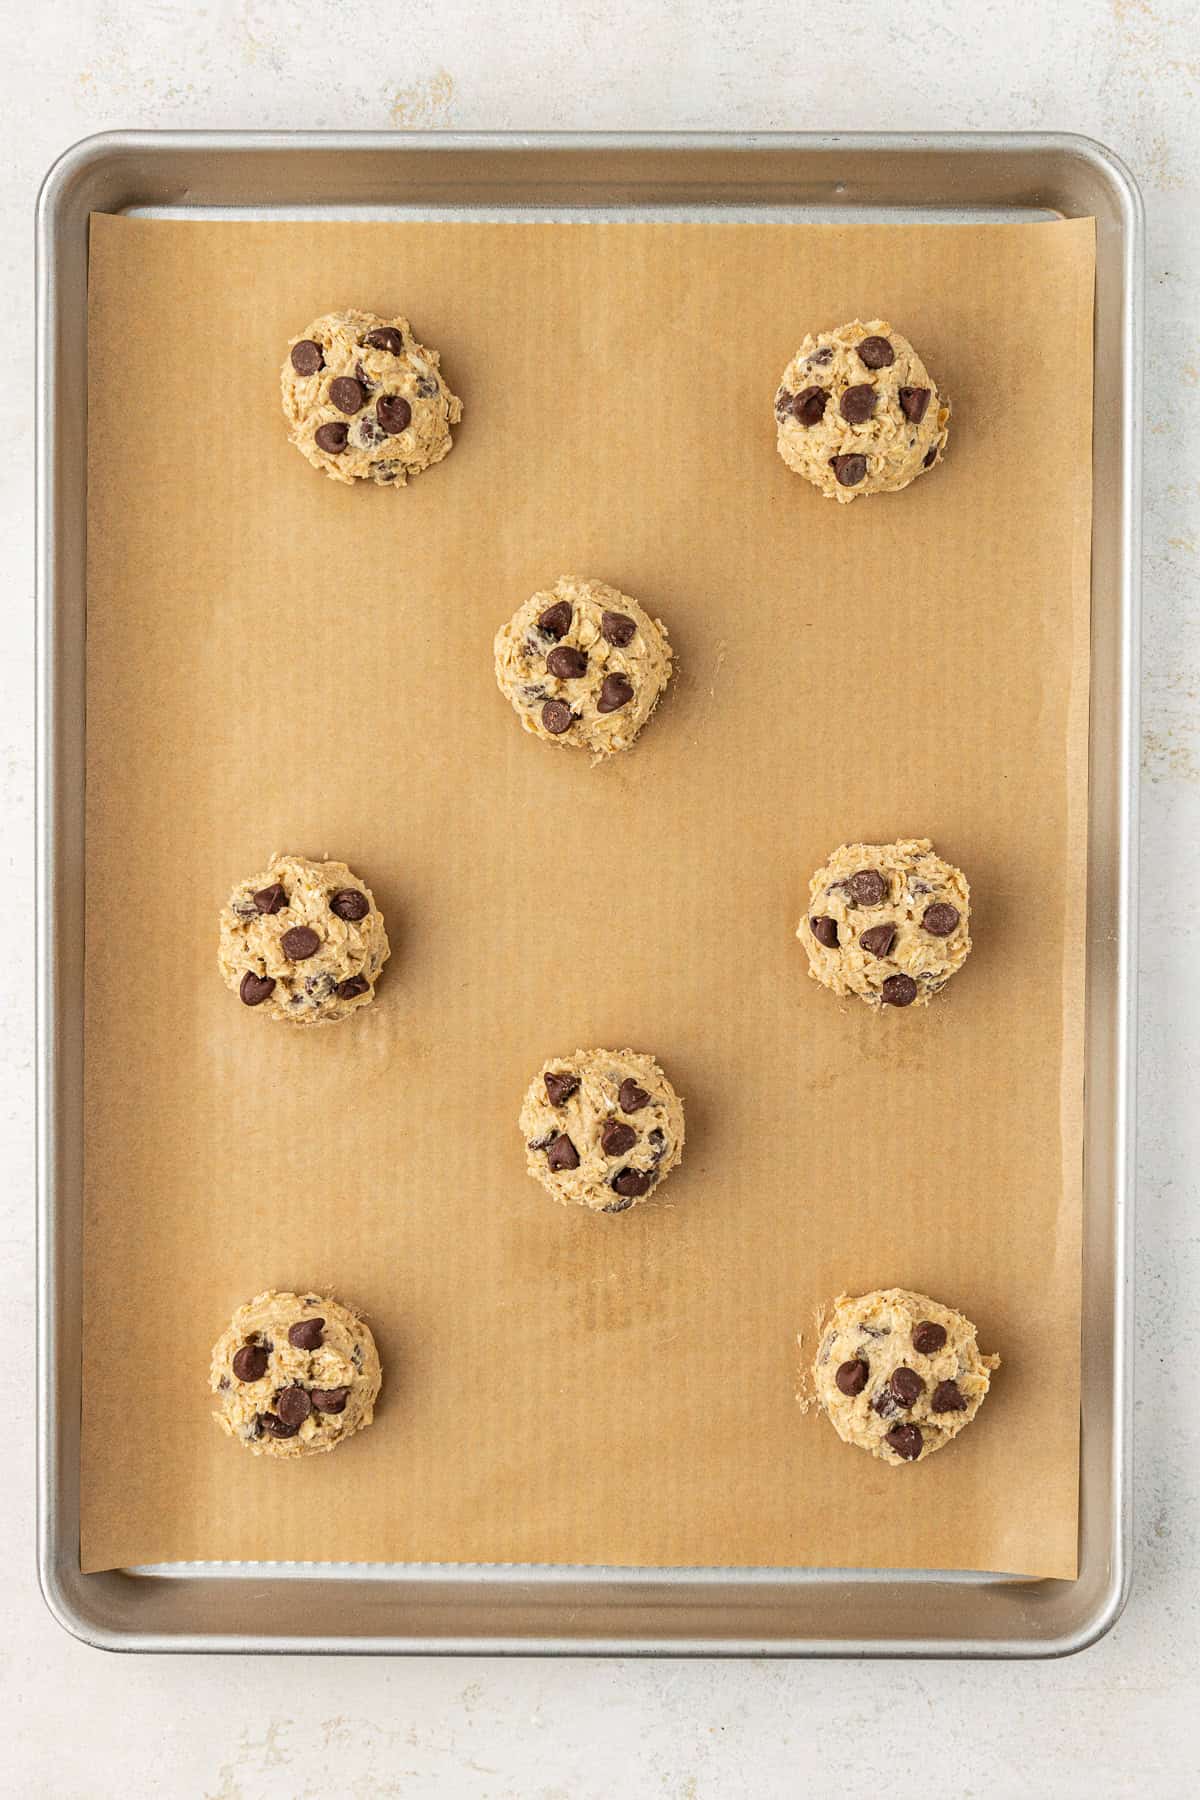 oatmeal chocolate chip cookie dough balls spread out on a baking sheet lined with brown parchment paper